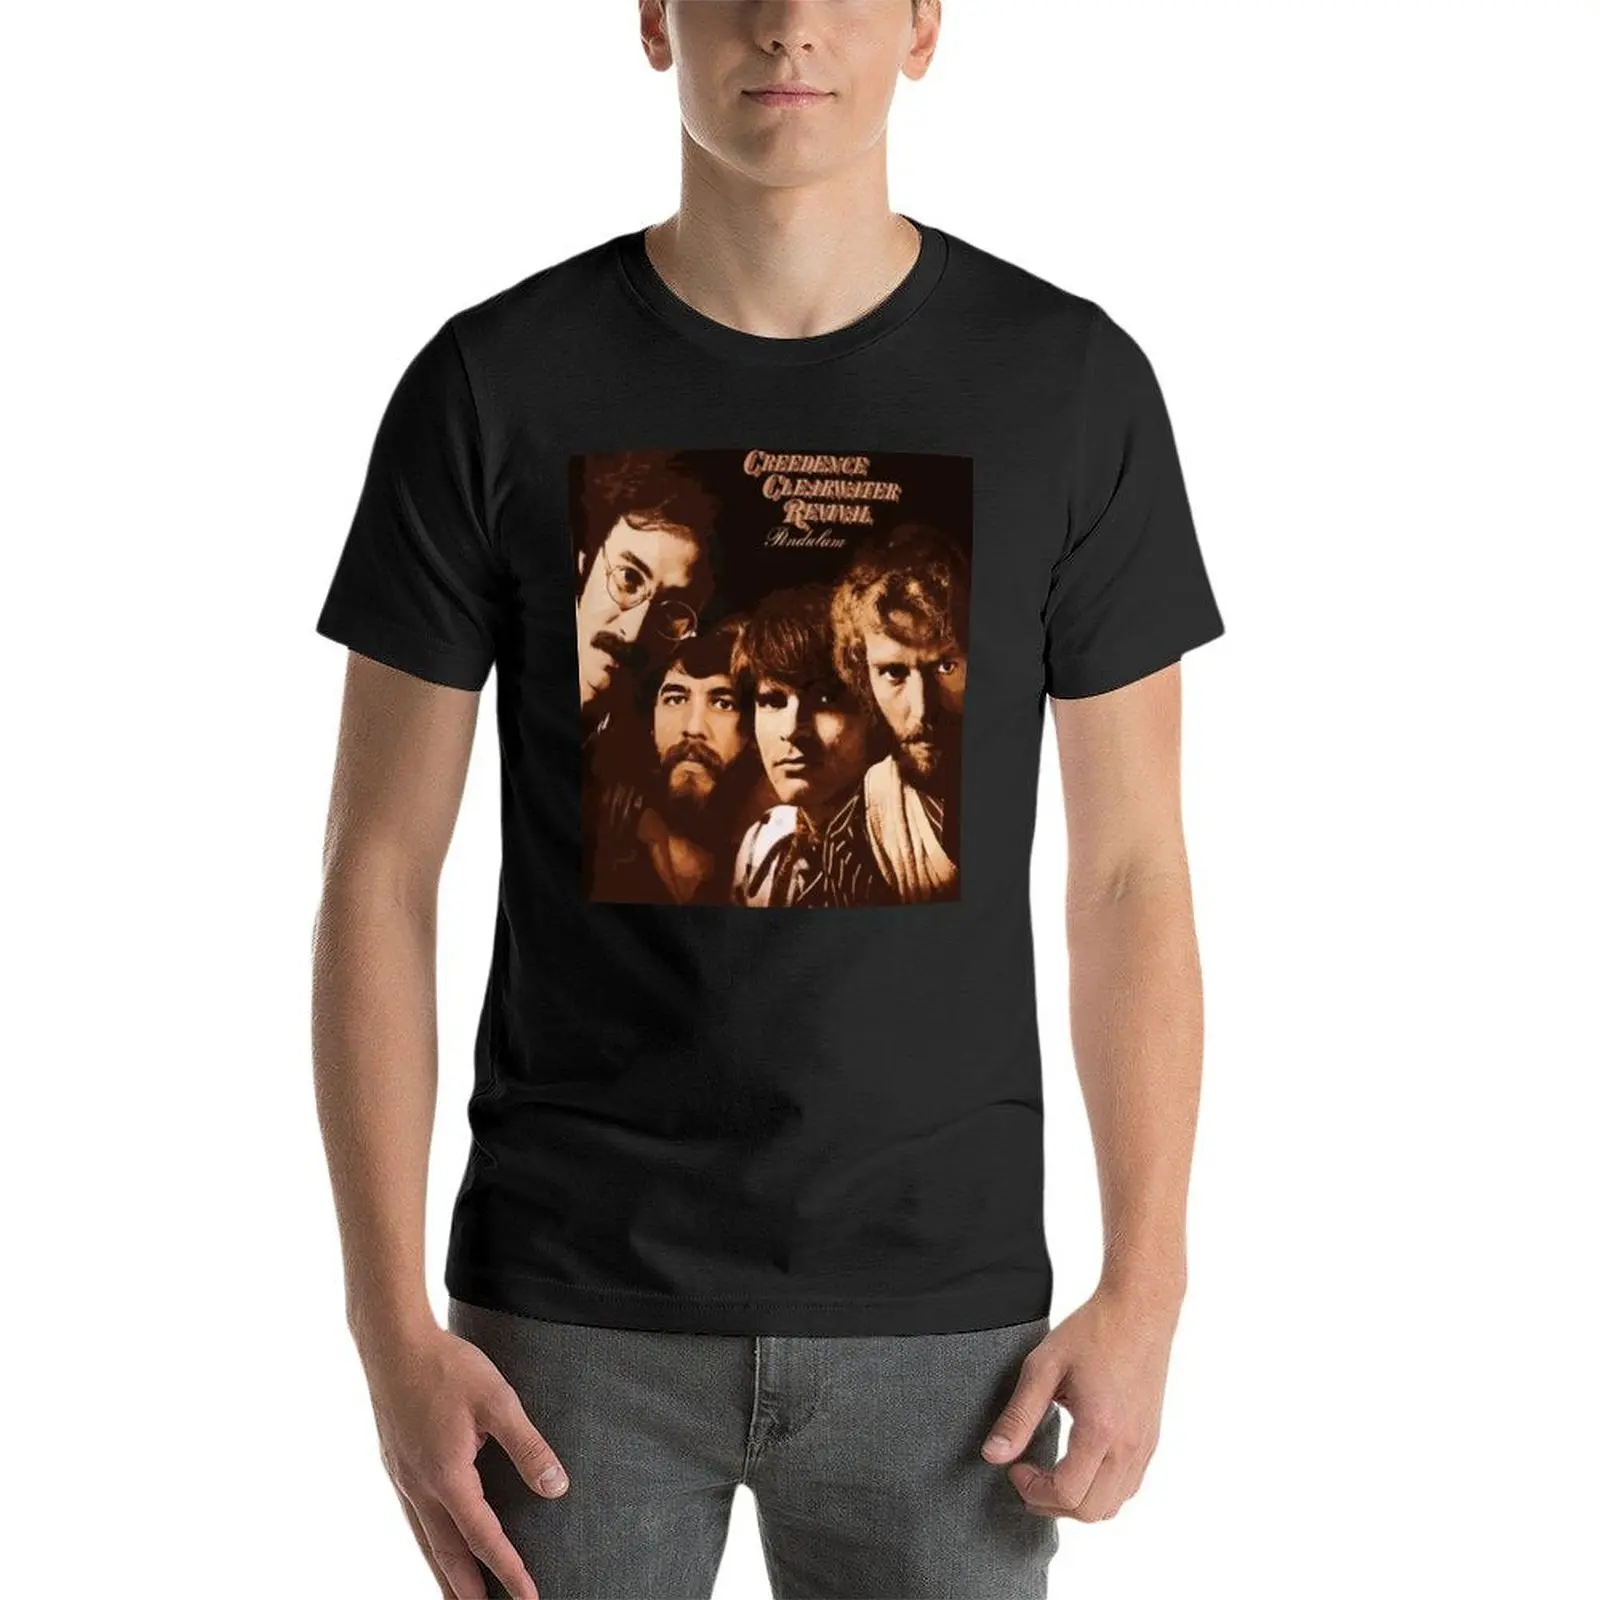 

Creedence Clearwater Revival Pendulum Album Oversize Tshirt Brand Men Clothing 100% Cotton Streetwear Large Size Tops Tee